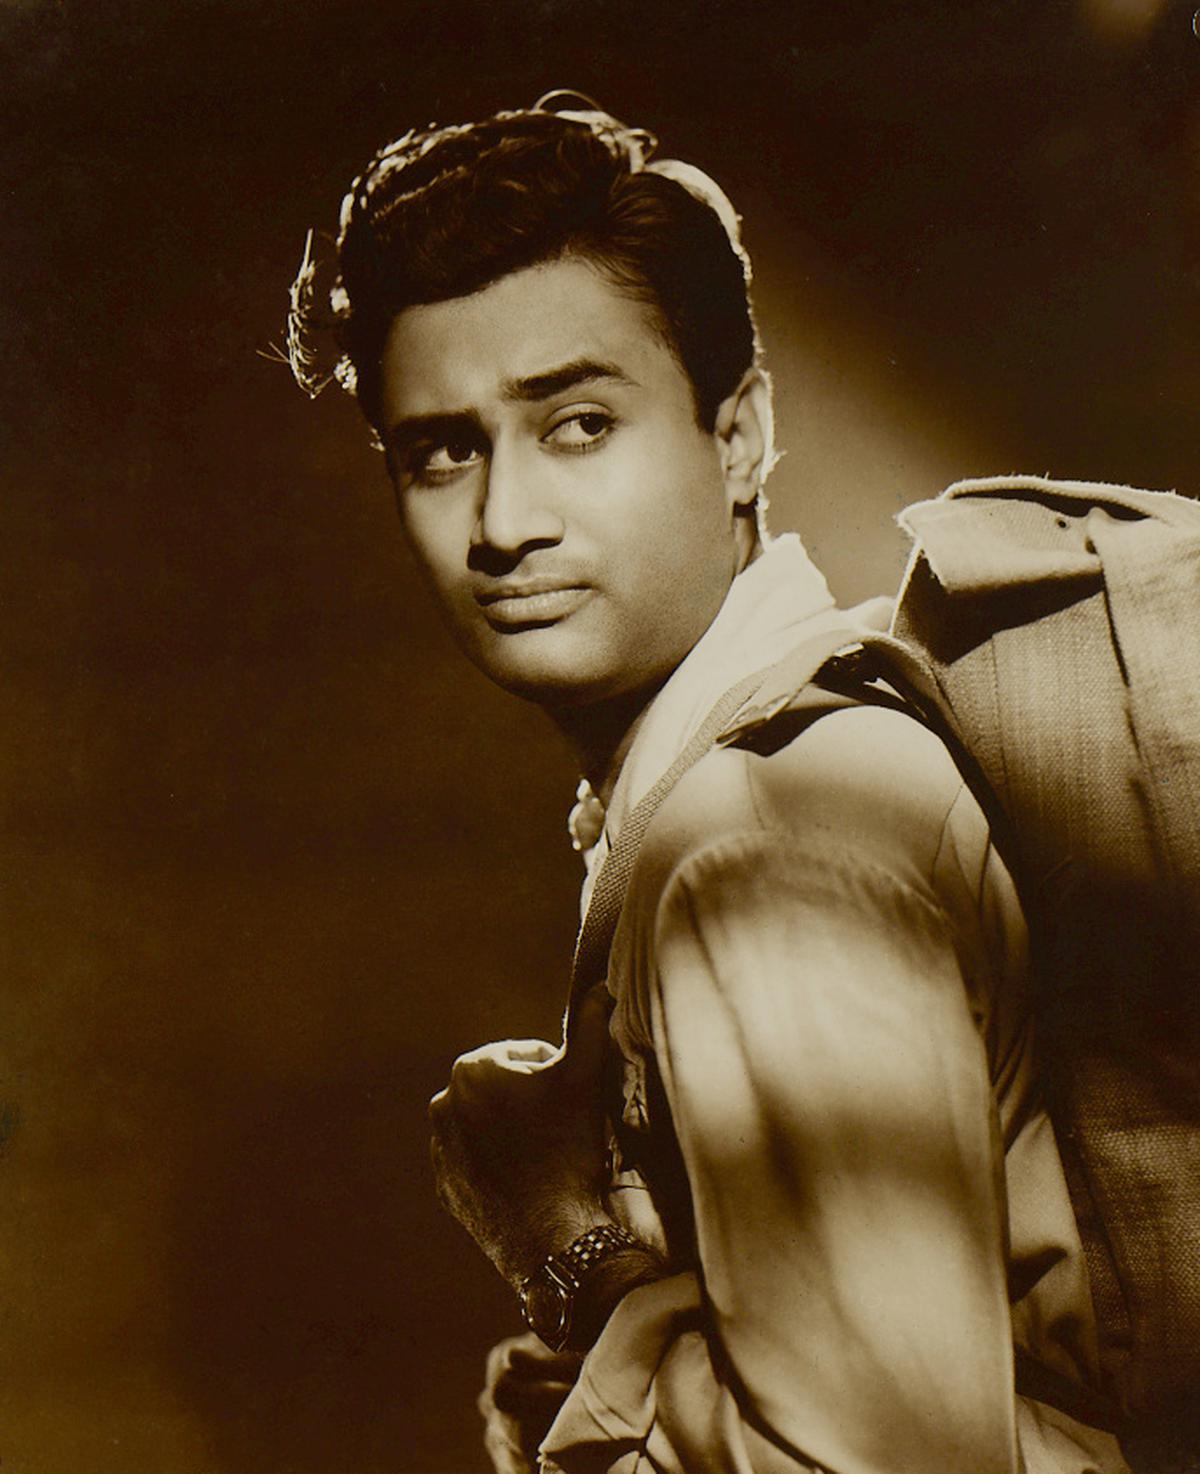 The many shades of Dev Anand: The most loved hero, who was also a